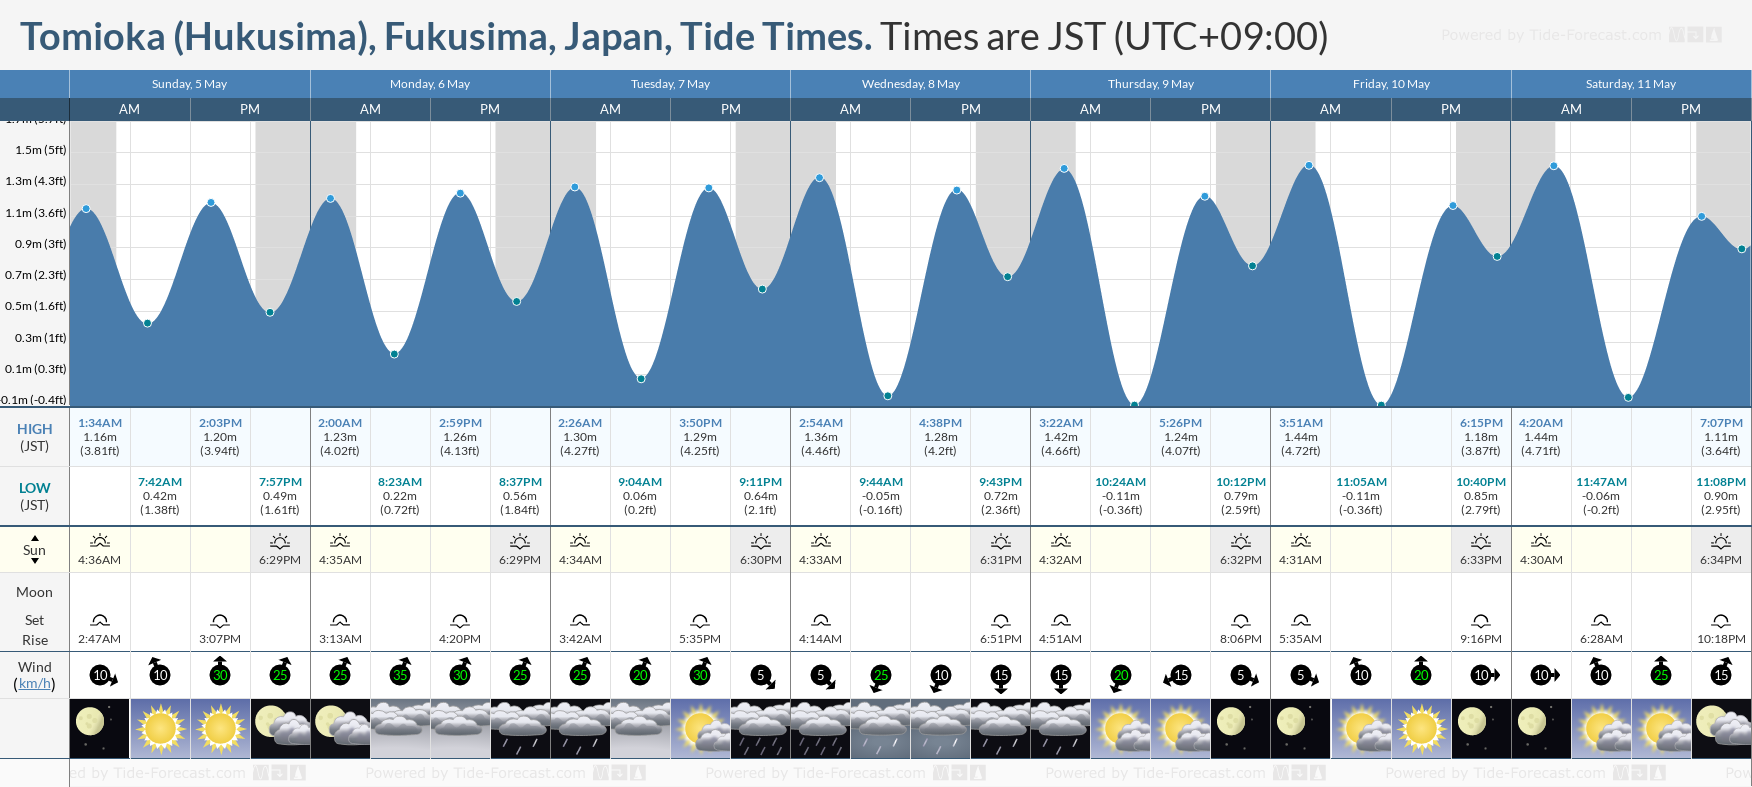 Tomioka (Hukusima), Fukusima, Japan Tide Chart including high and low tide tide times for the next 7 days